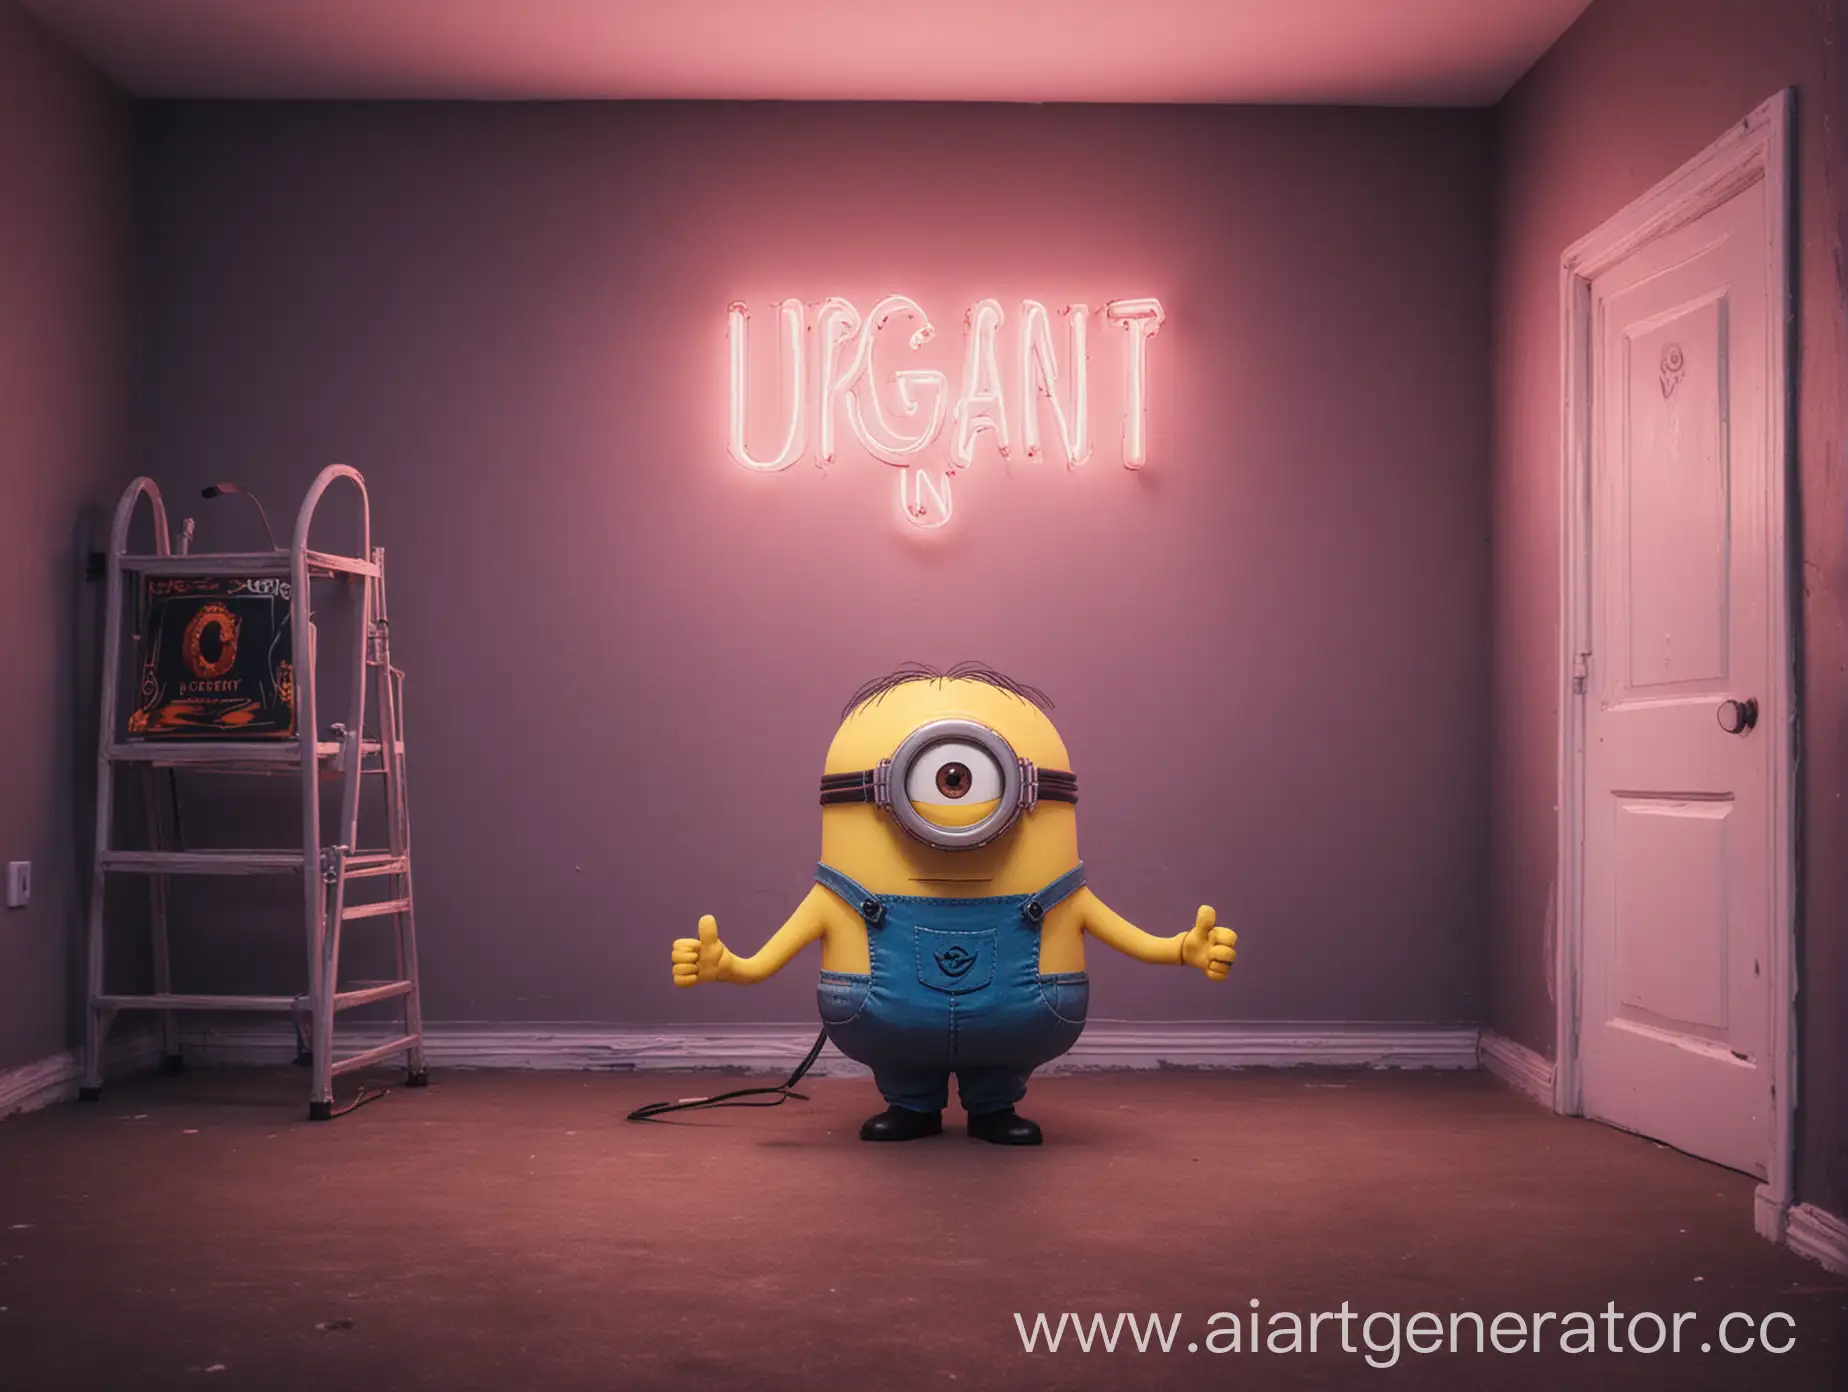 Neon-Room-with-Minion-Under-URGANT-Sign